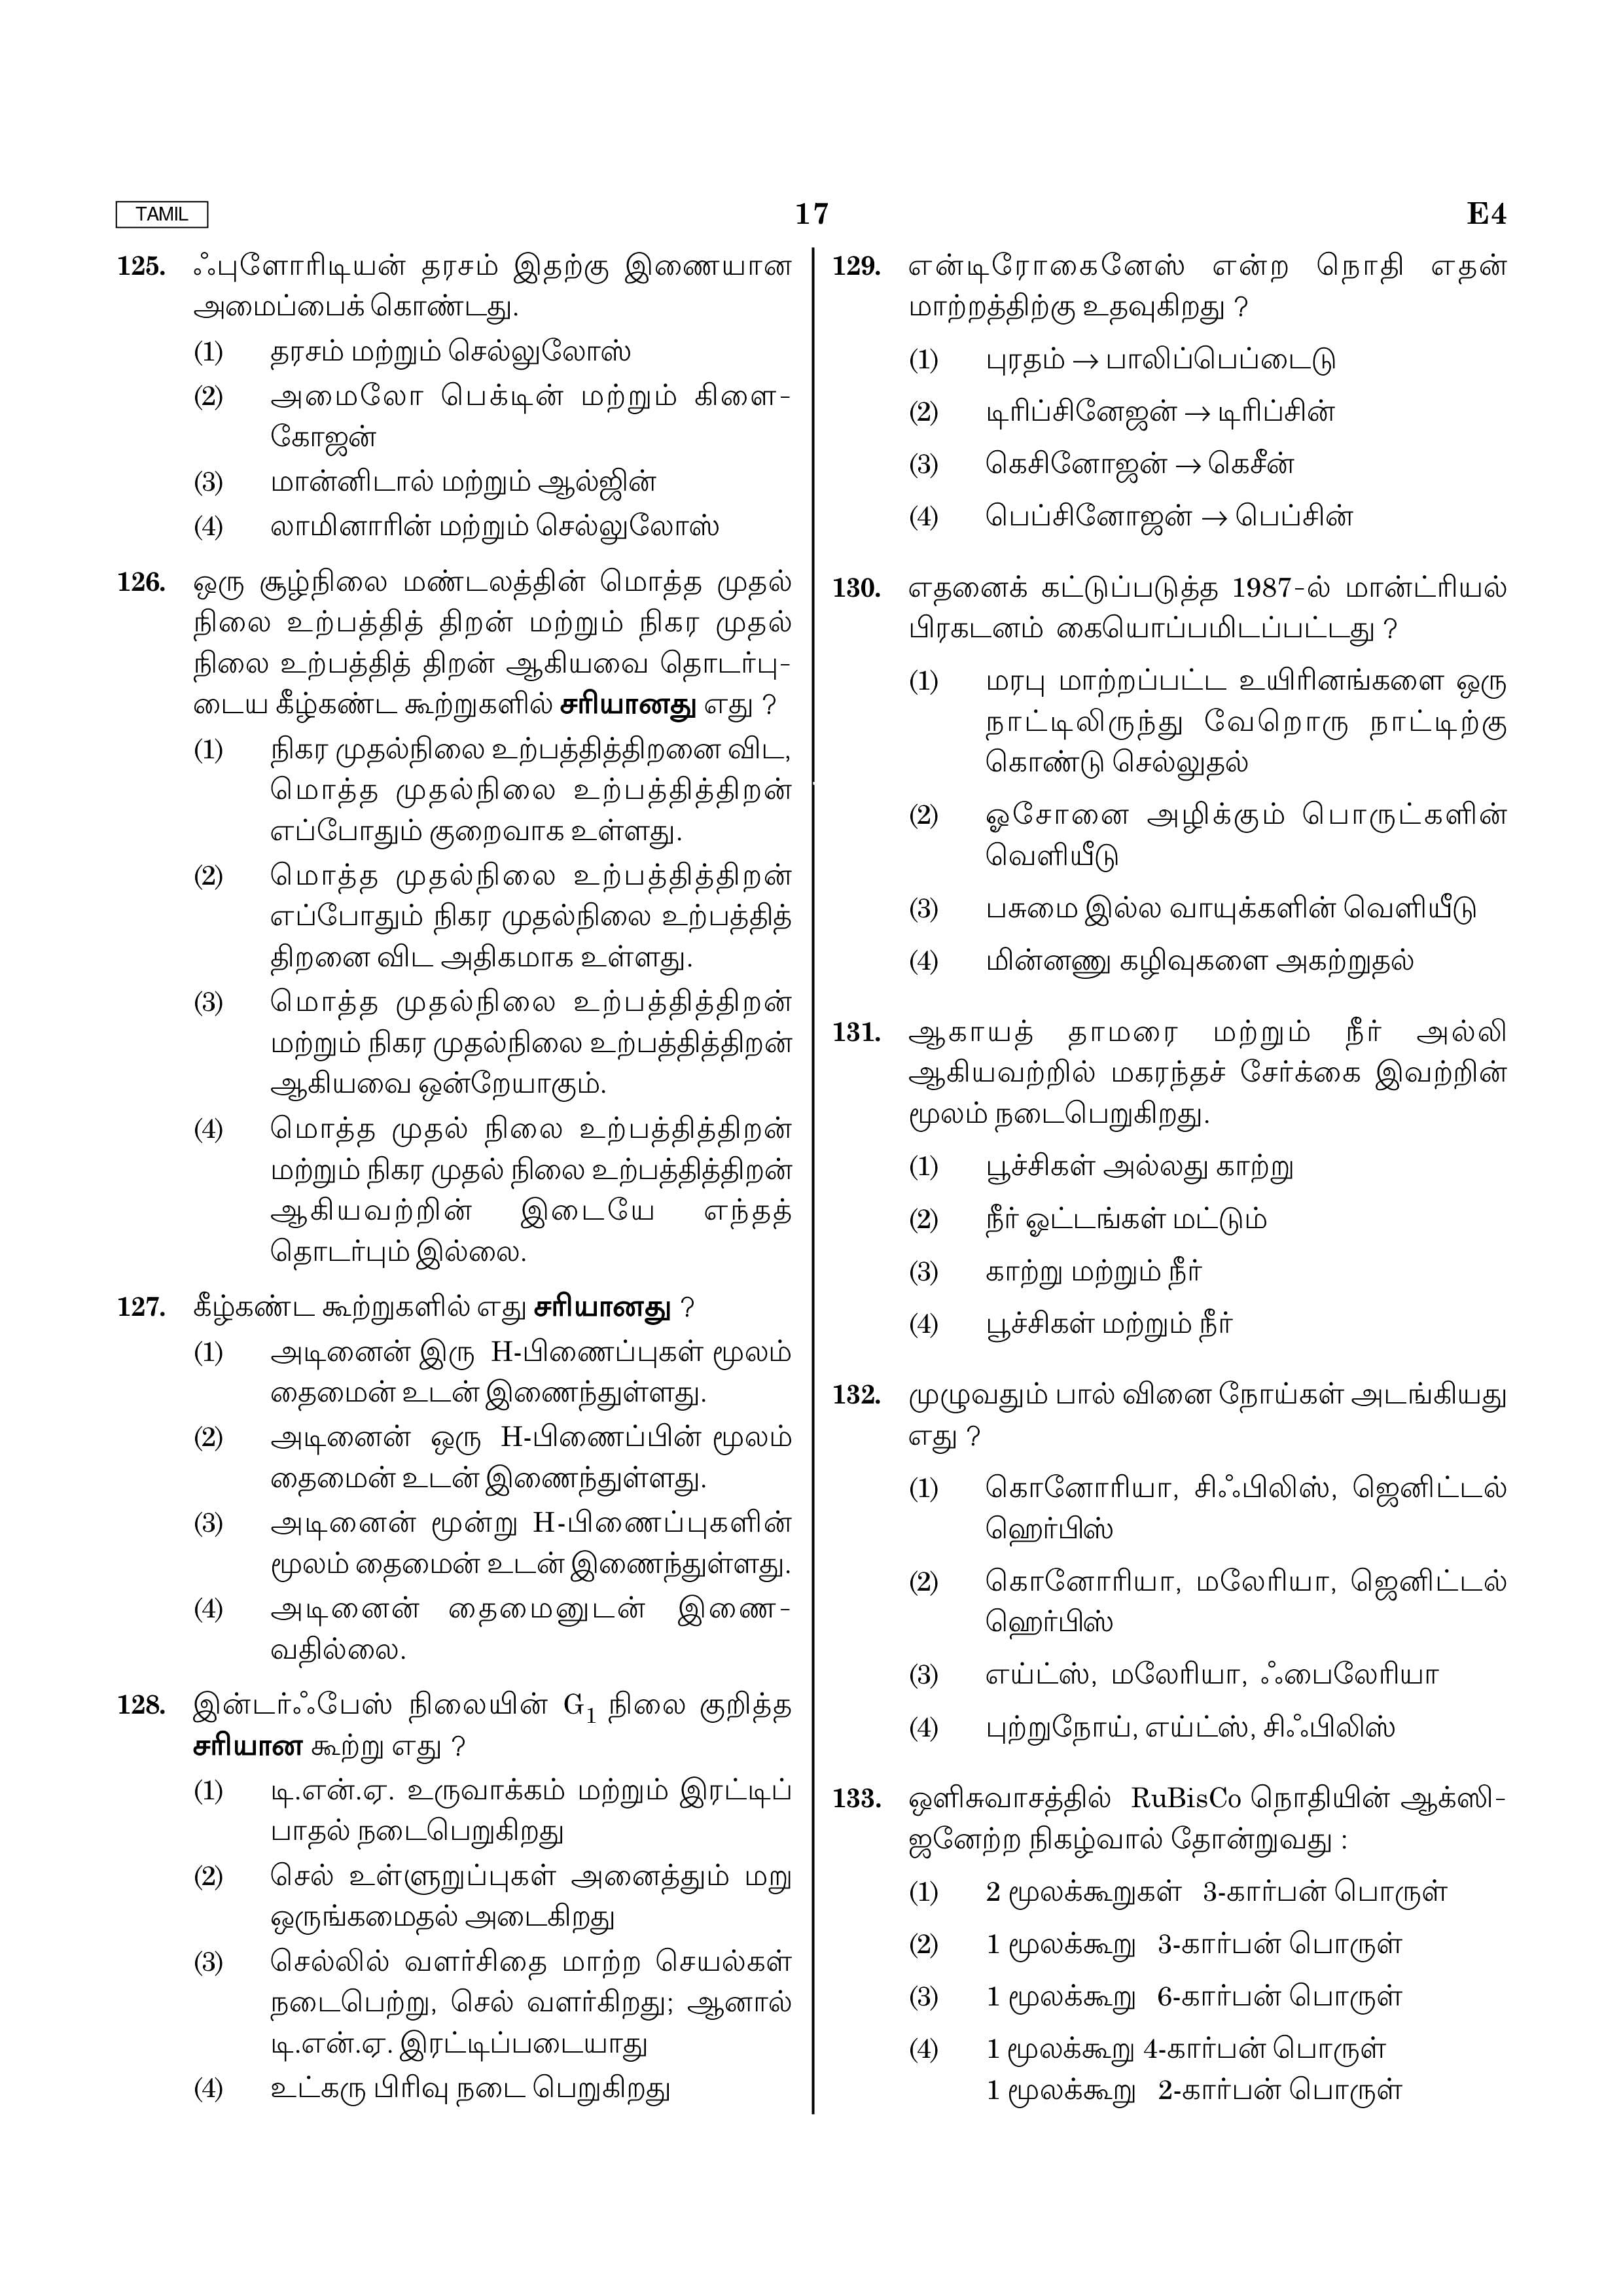 Neet 2020 Question Paper With Answer Key Pdf In Tamil For E4 To H4 